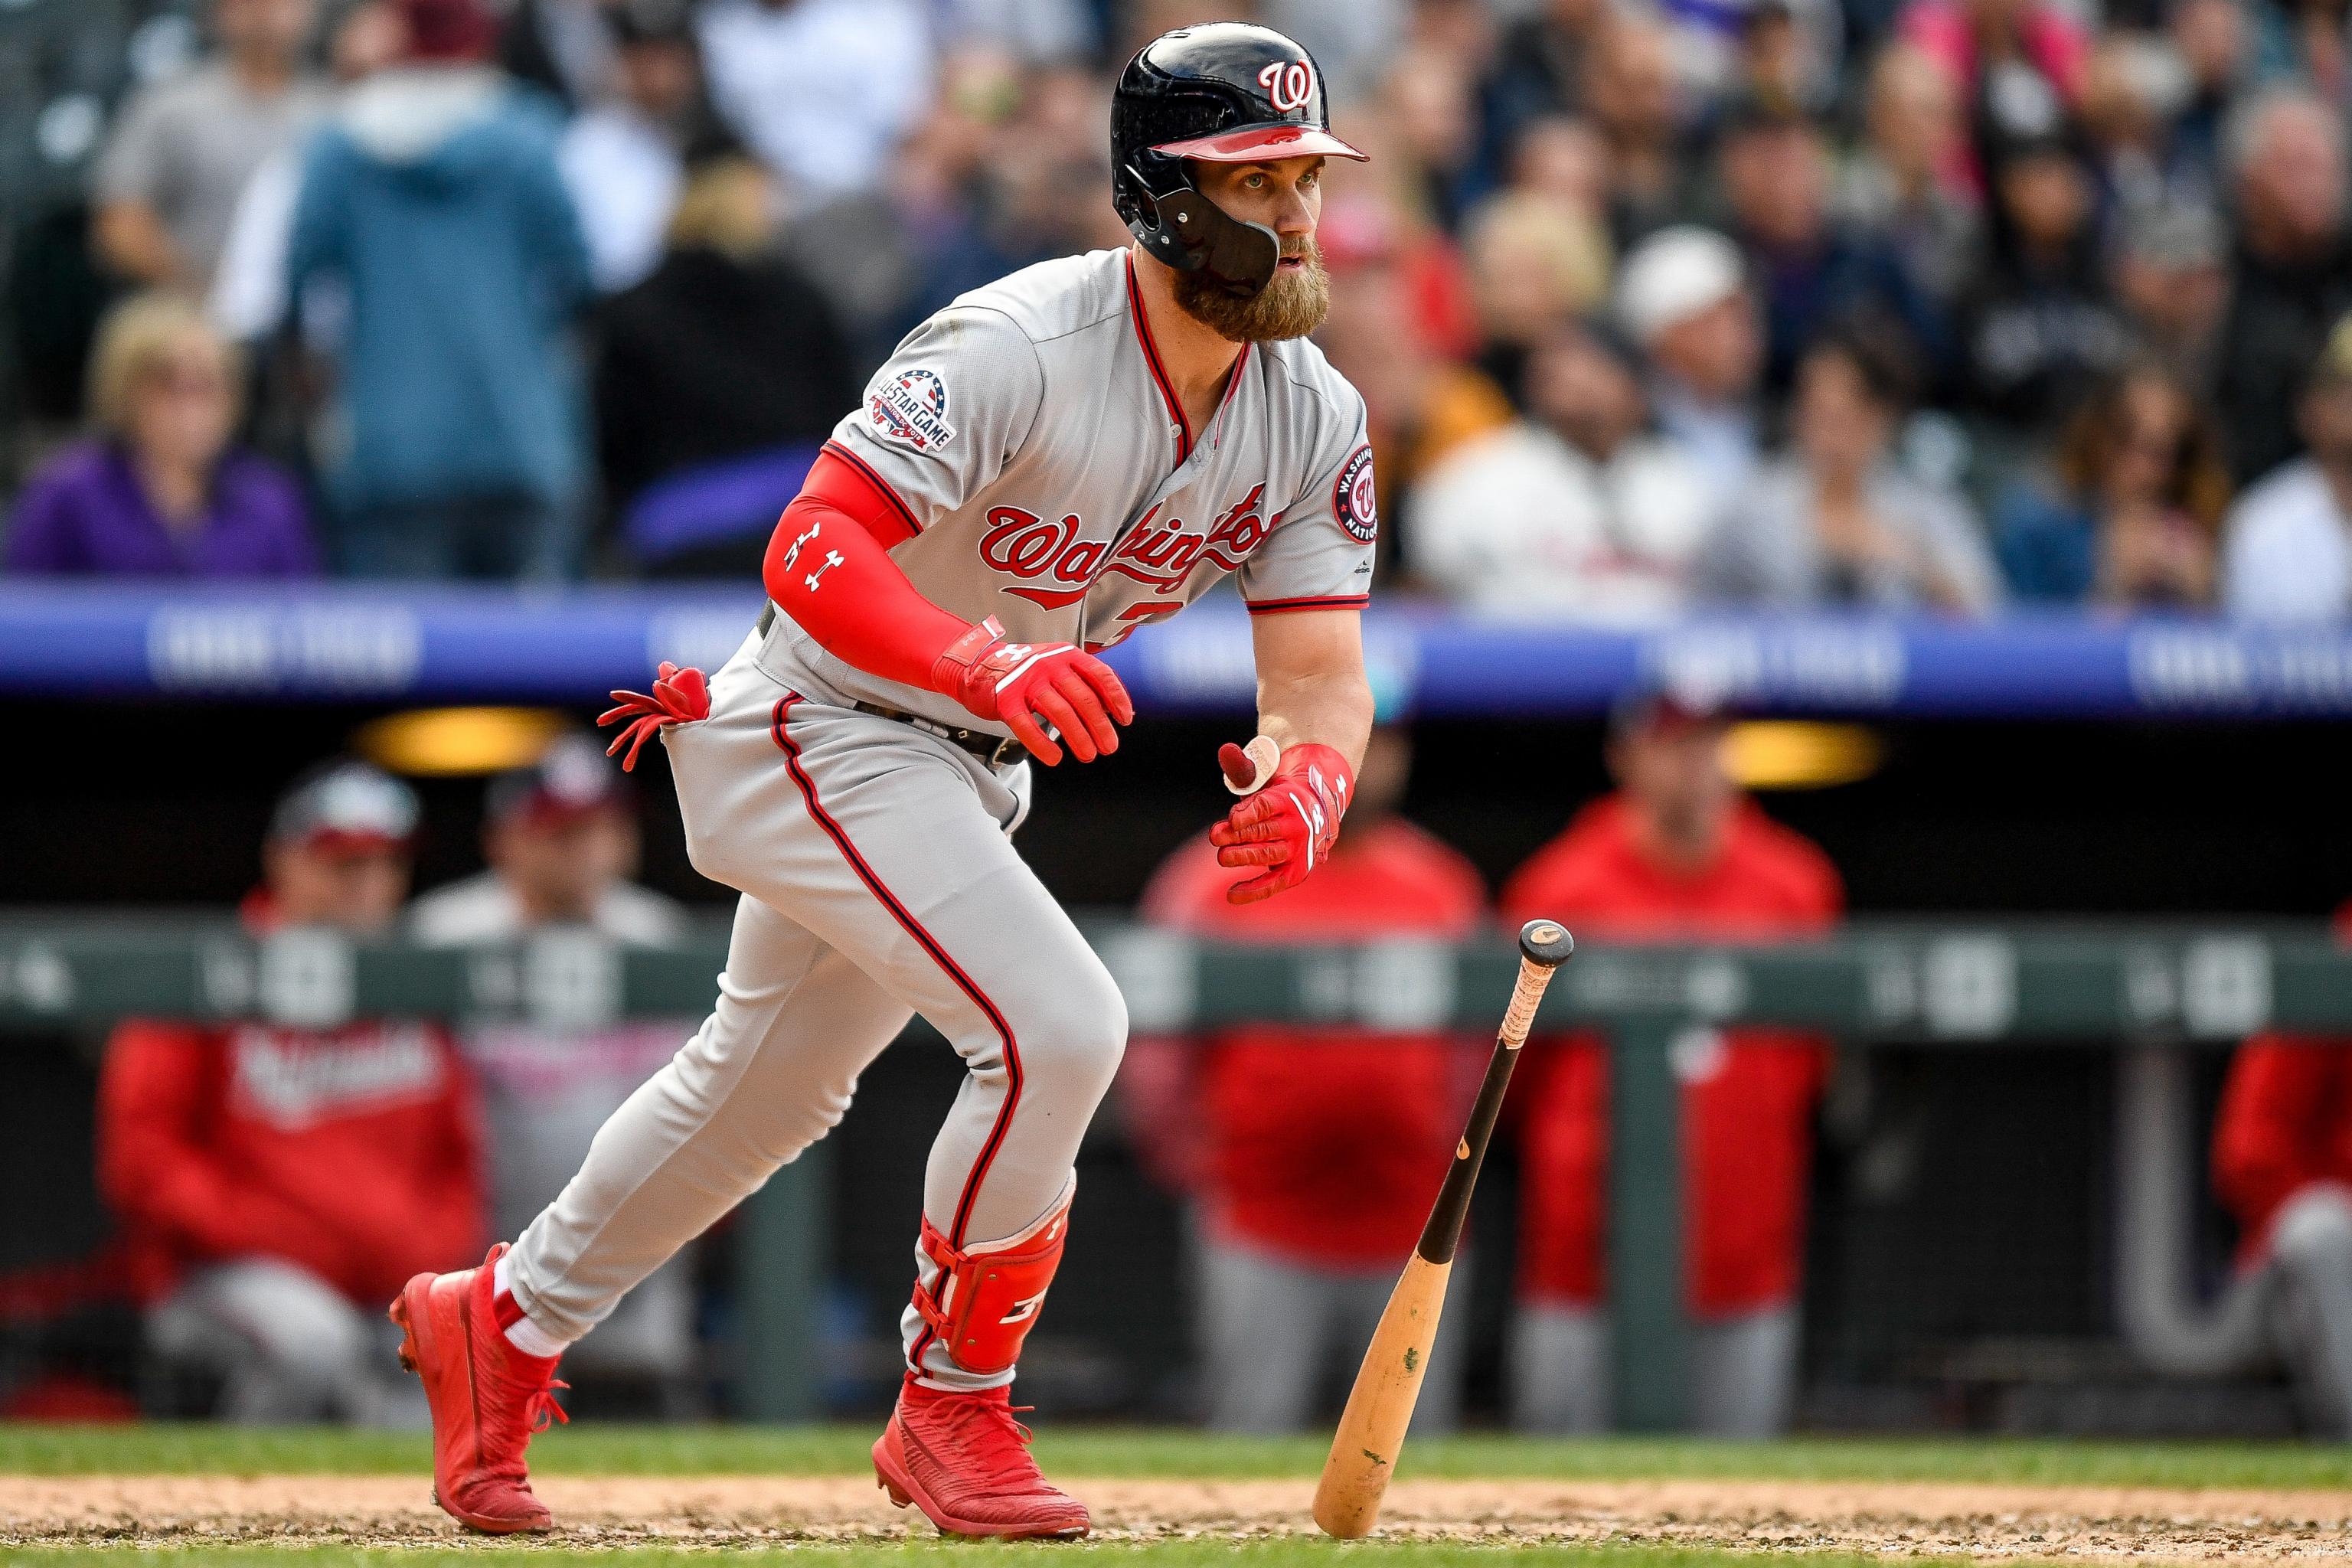 How Bryce Harper was almost traded to Astros: The rumored 2018